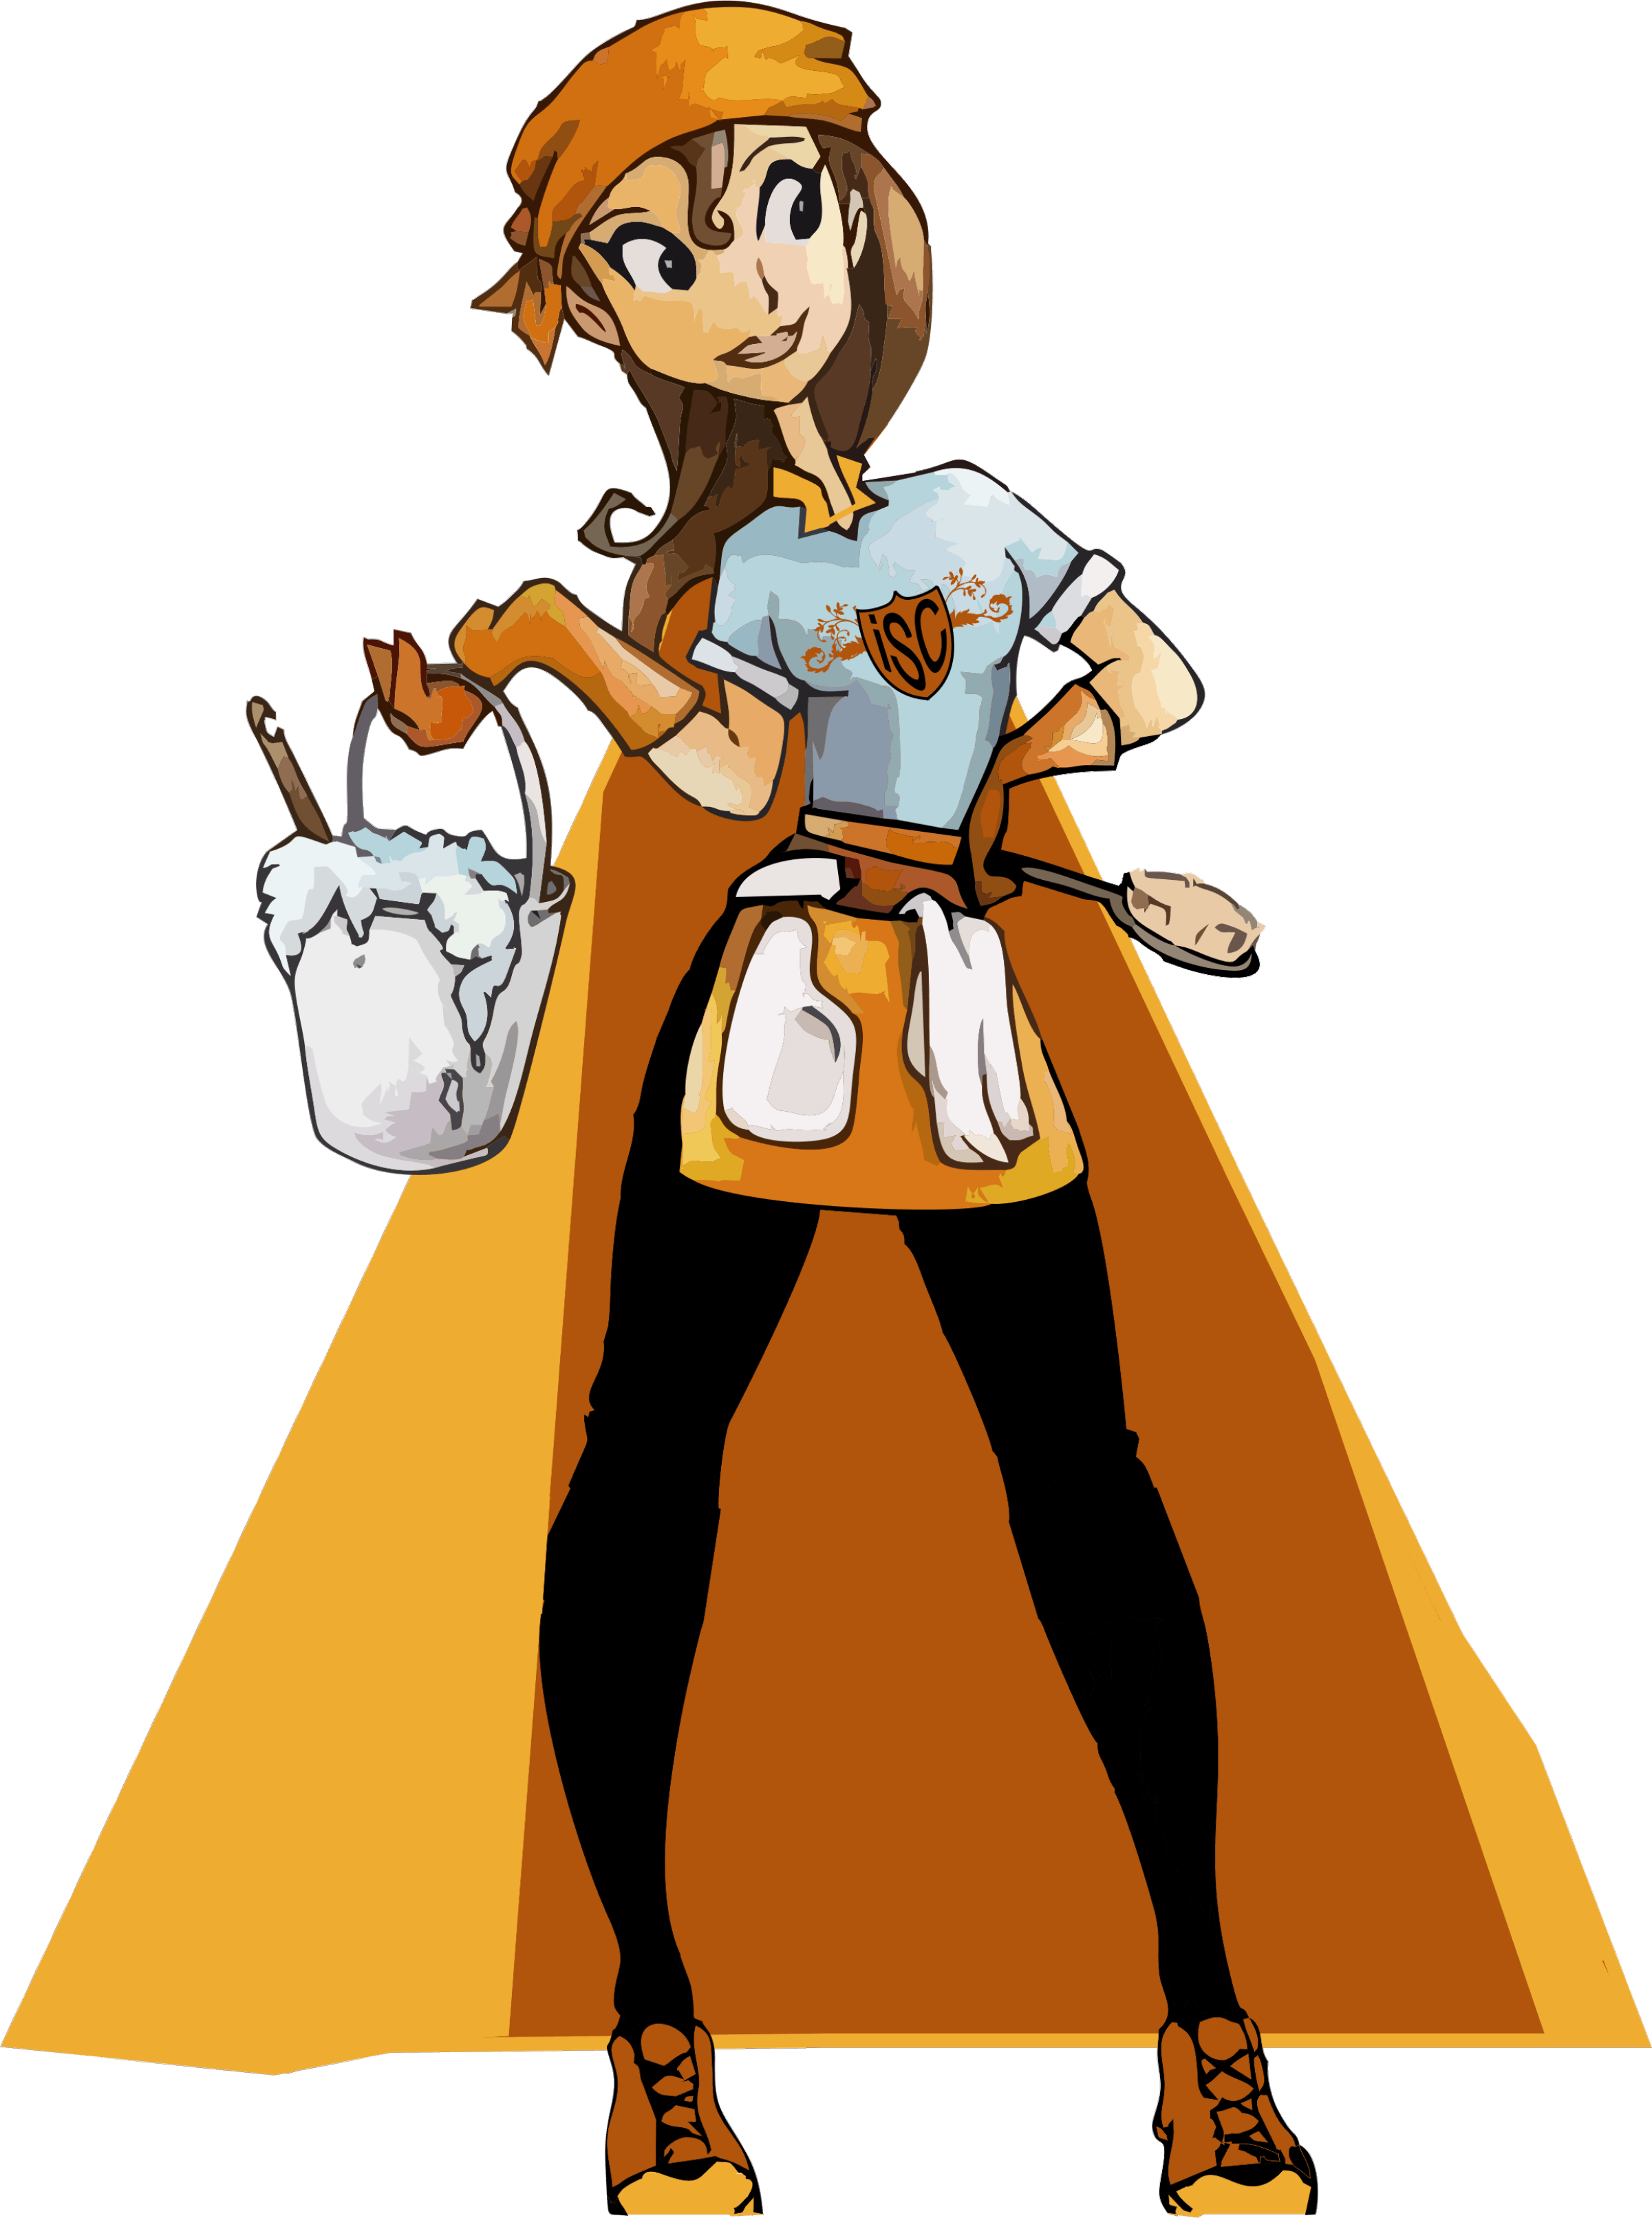 Home cleaning service year. Female clipart janitor